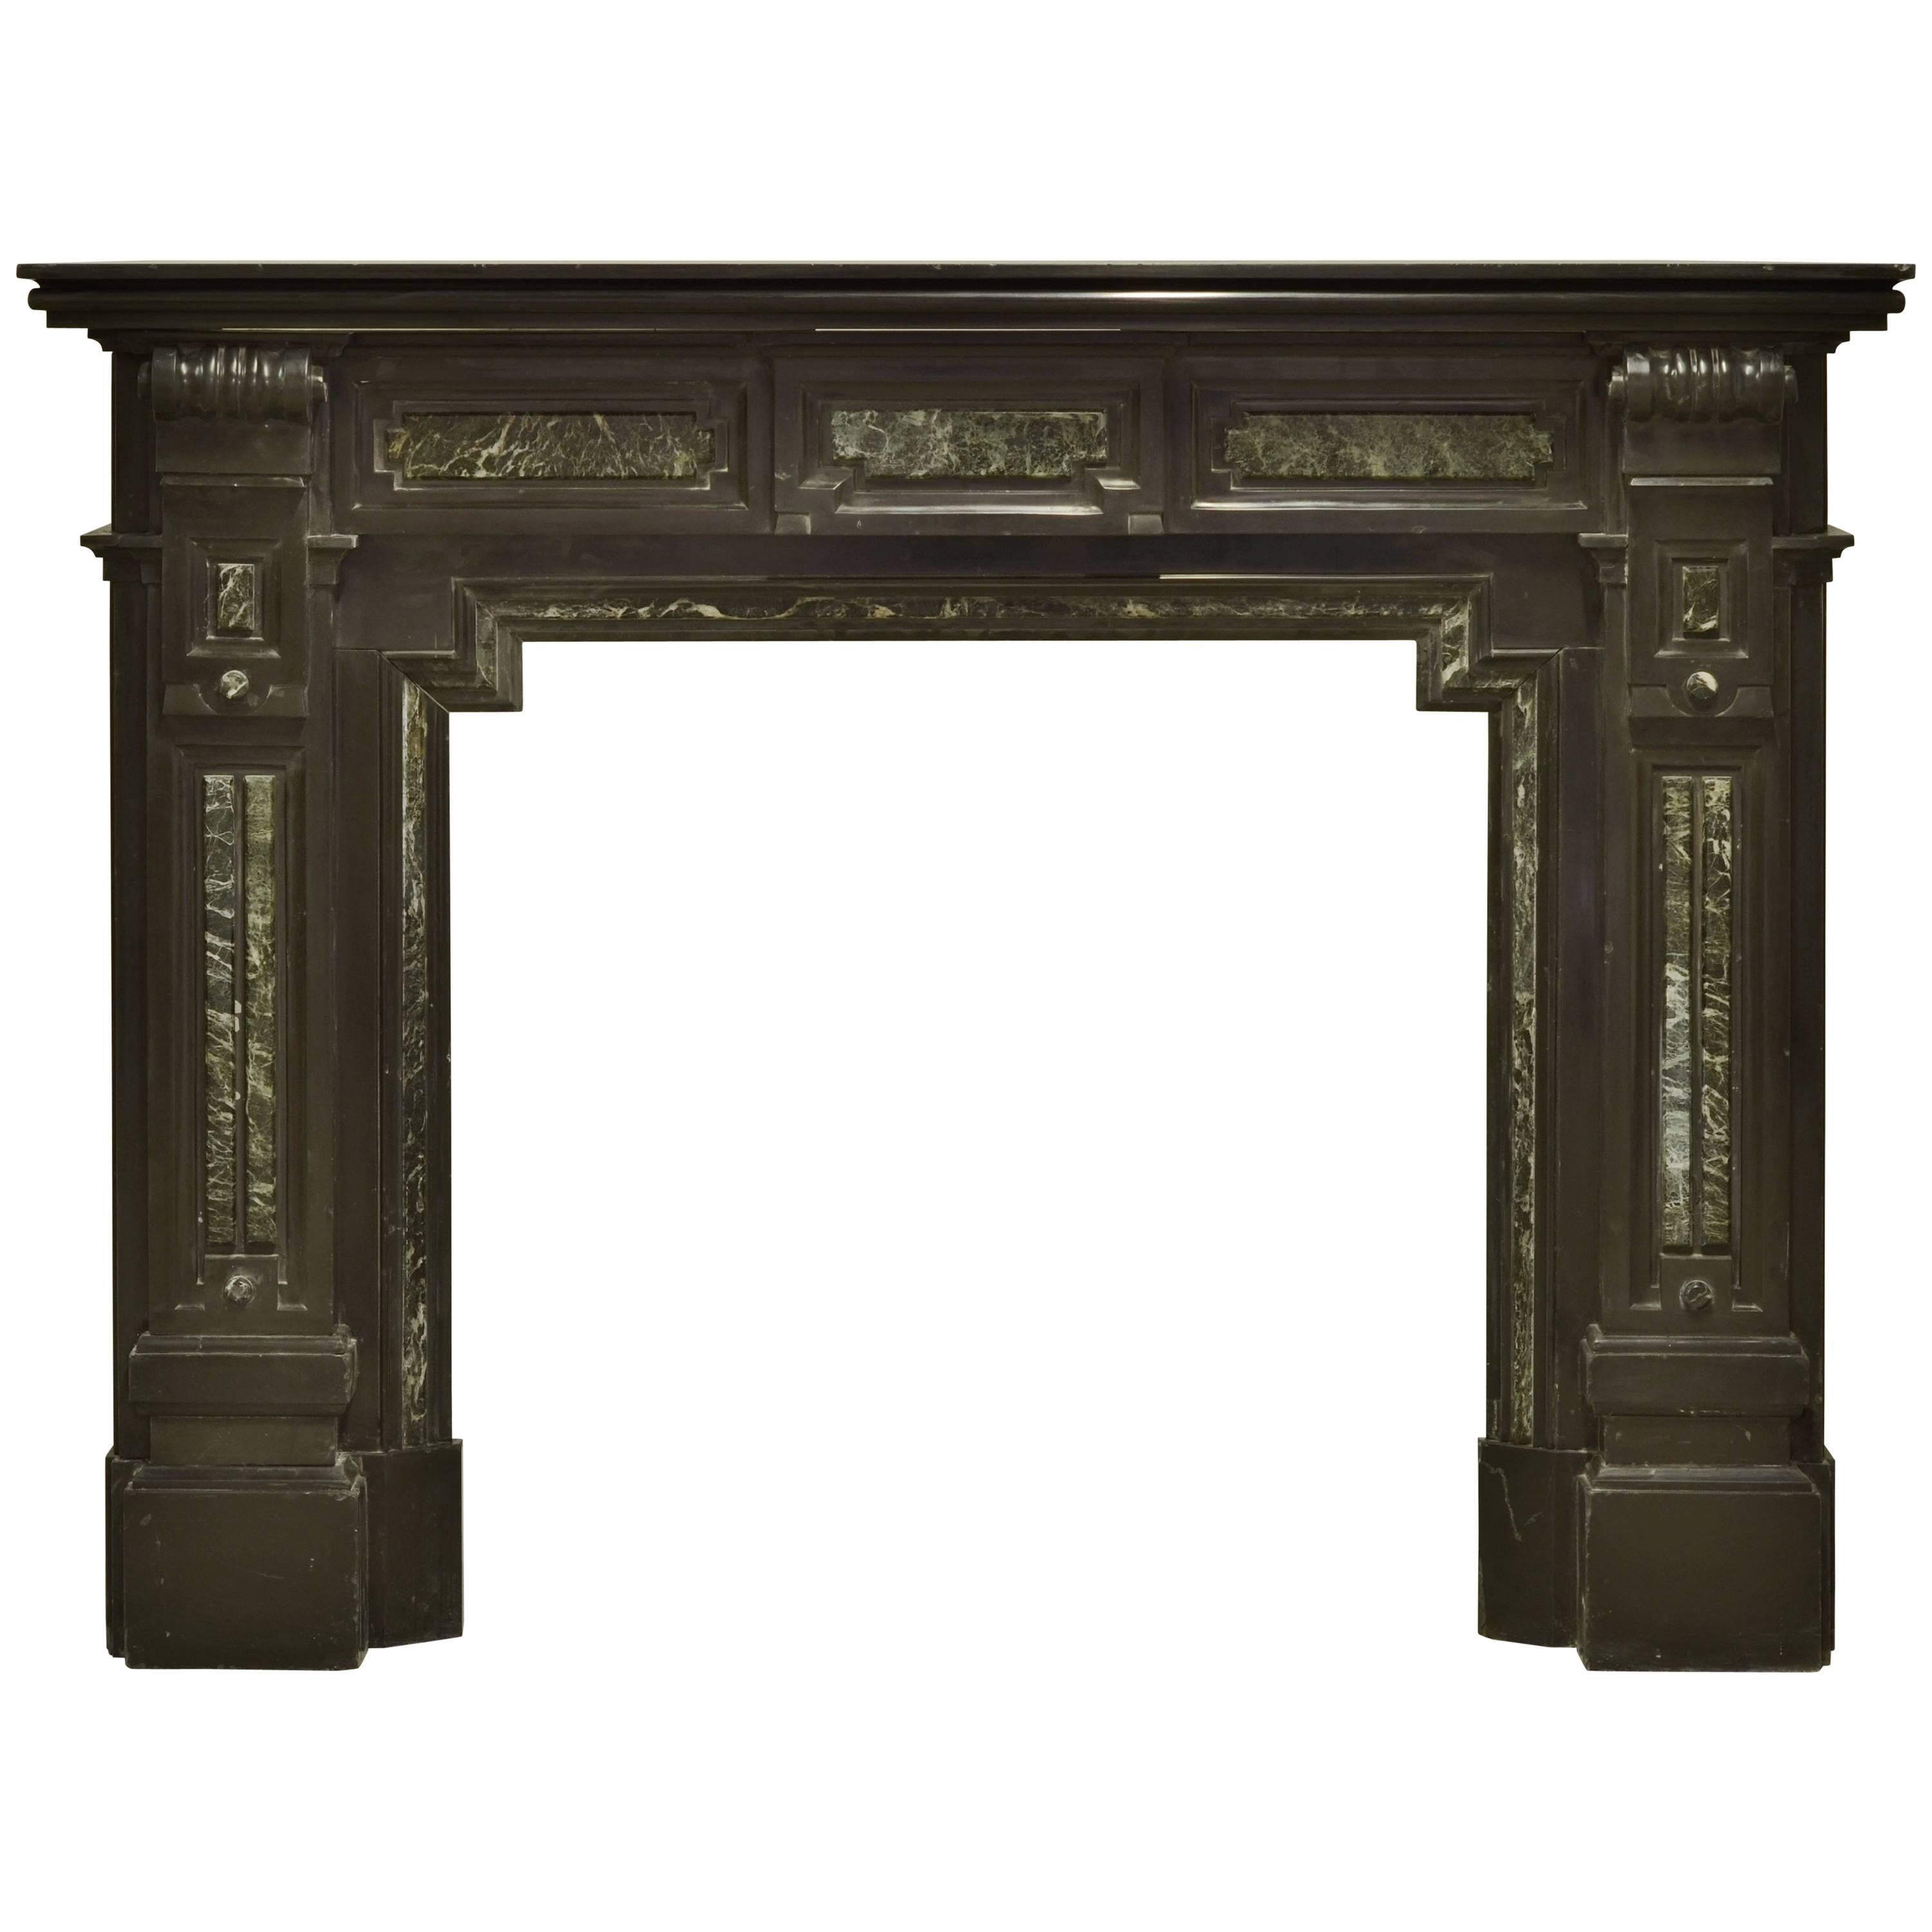 Monumental Dutch Black Marble Fireplace Mantel with Green Details